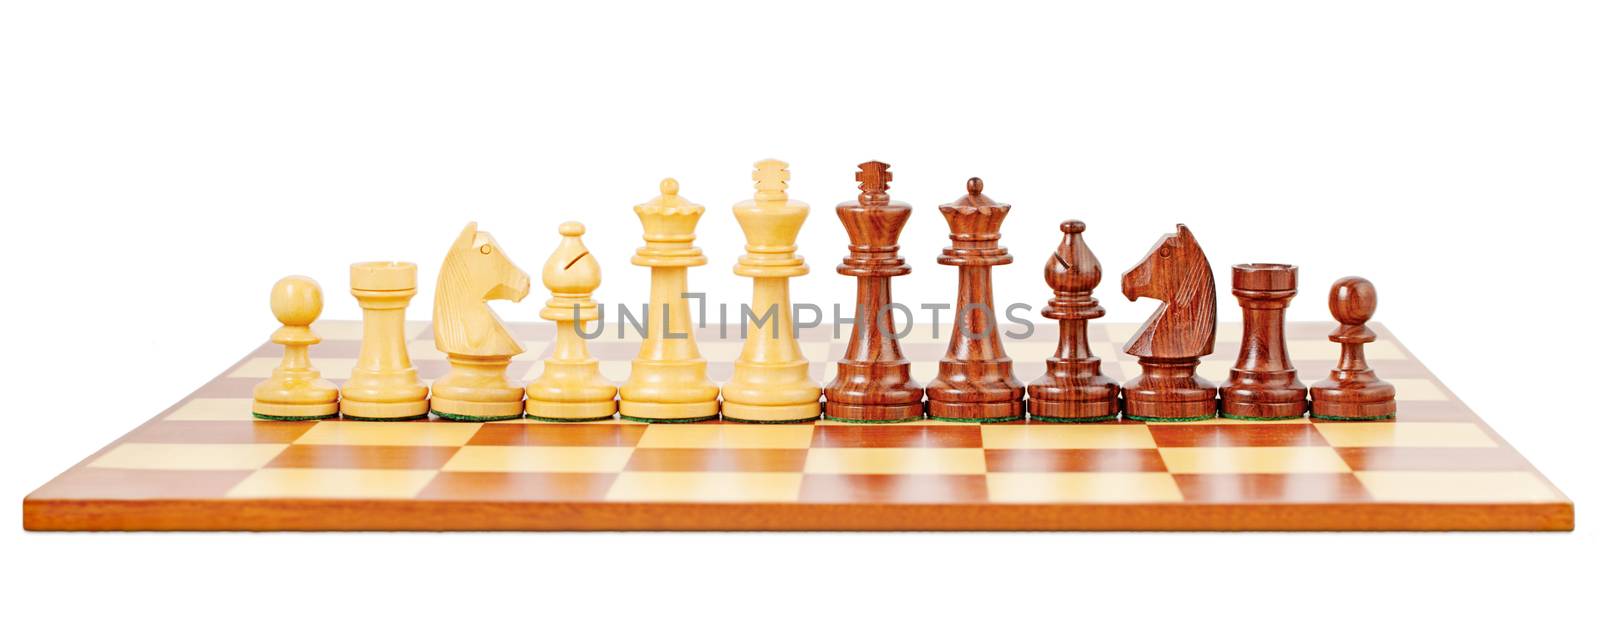 Chess board and chessmen, isolated on white background